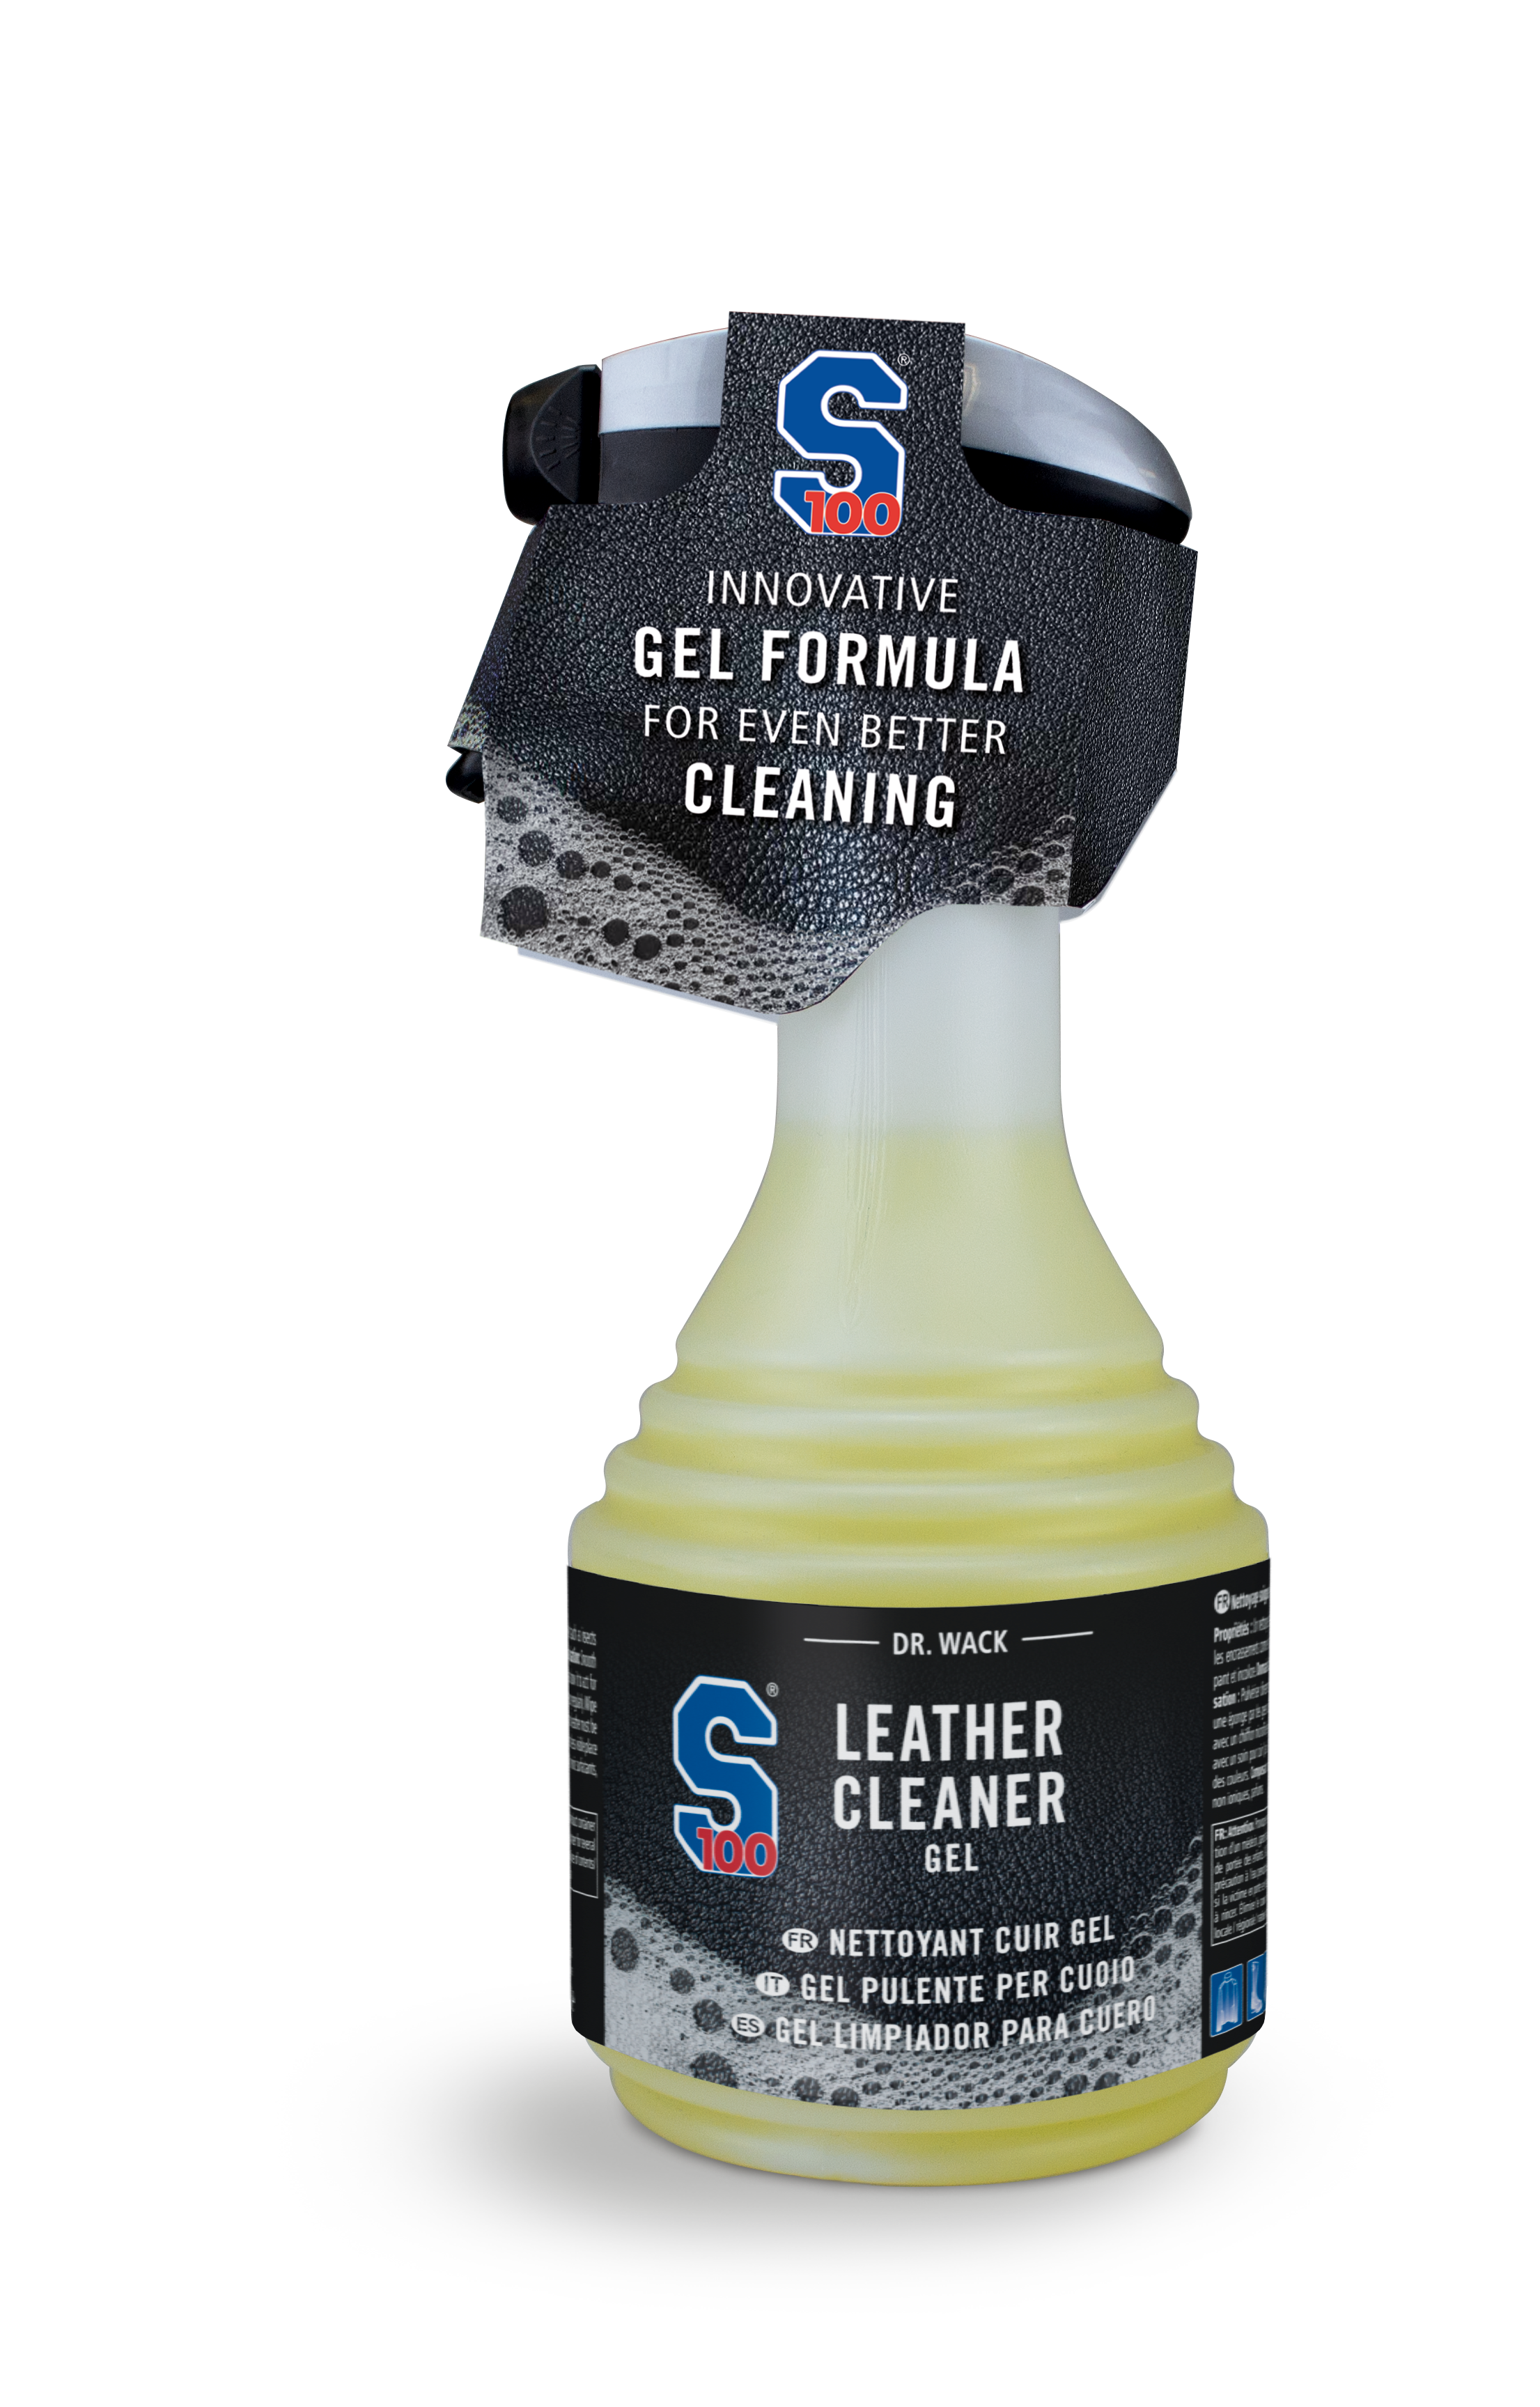 S100 Leather Cleaner GEL